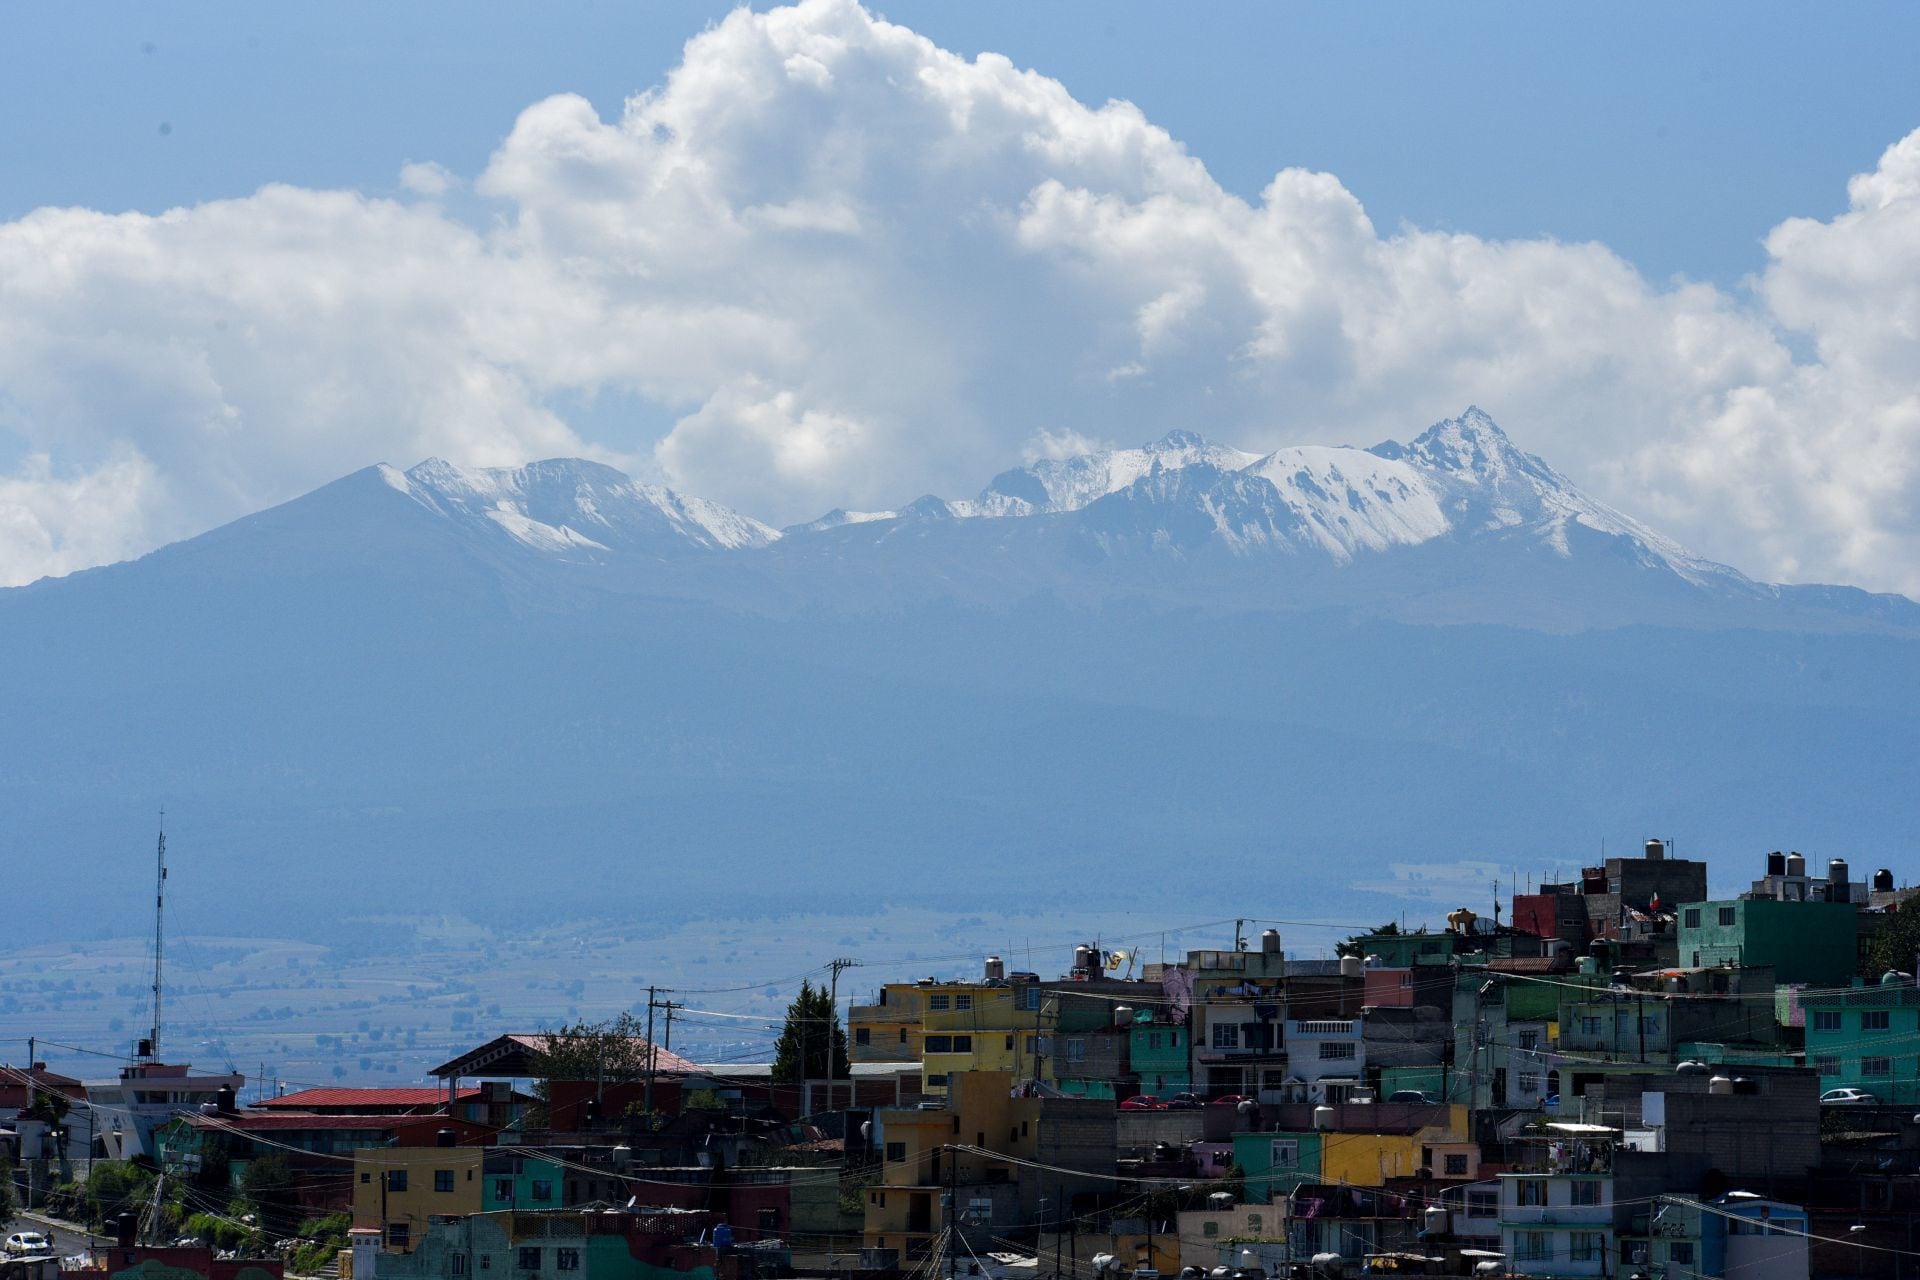 Looking for a winter destination?  Guide to visit the Nevado de Toluca thumbnail